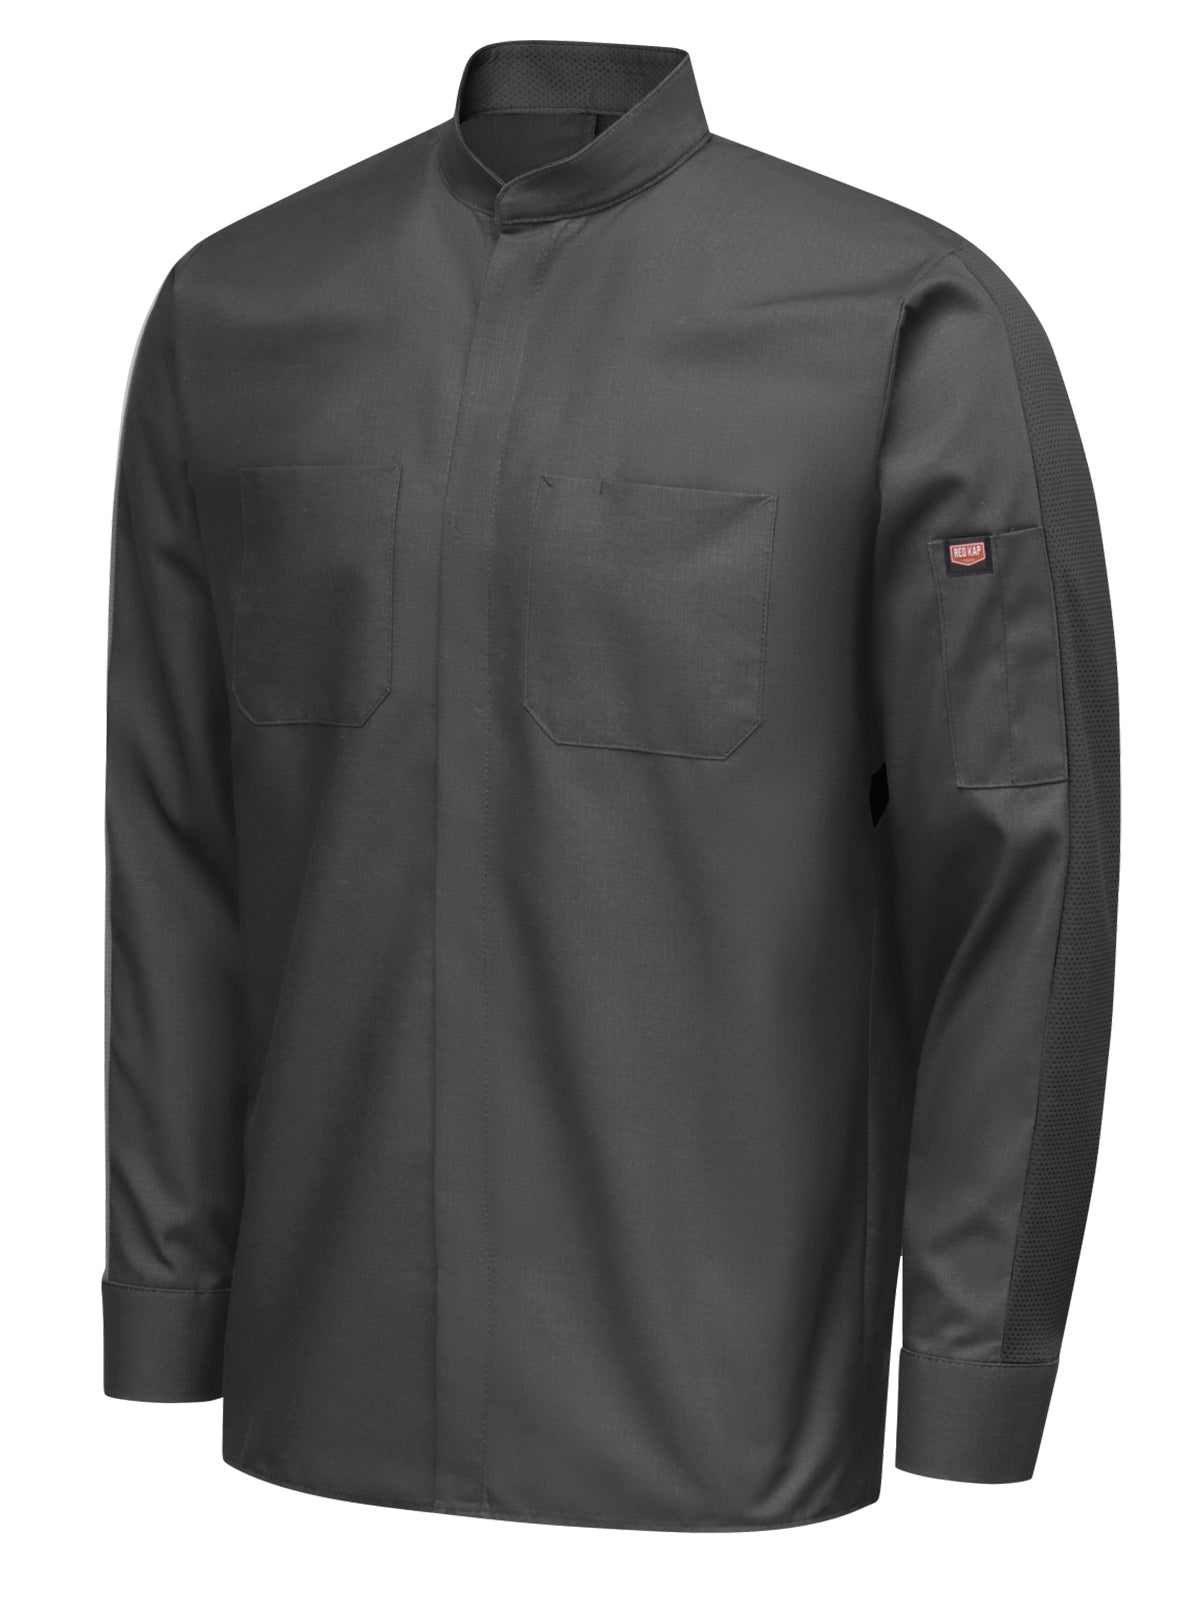 Men's Long Sleeve Two-Tone Pro+ Work Shirt with OilBlok and MIMIX™